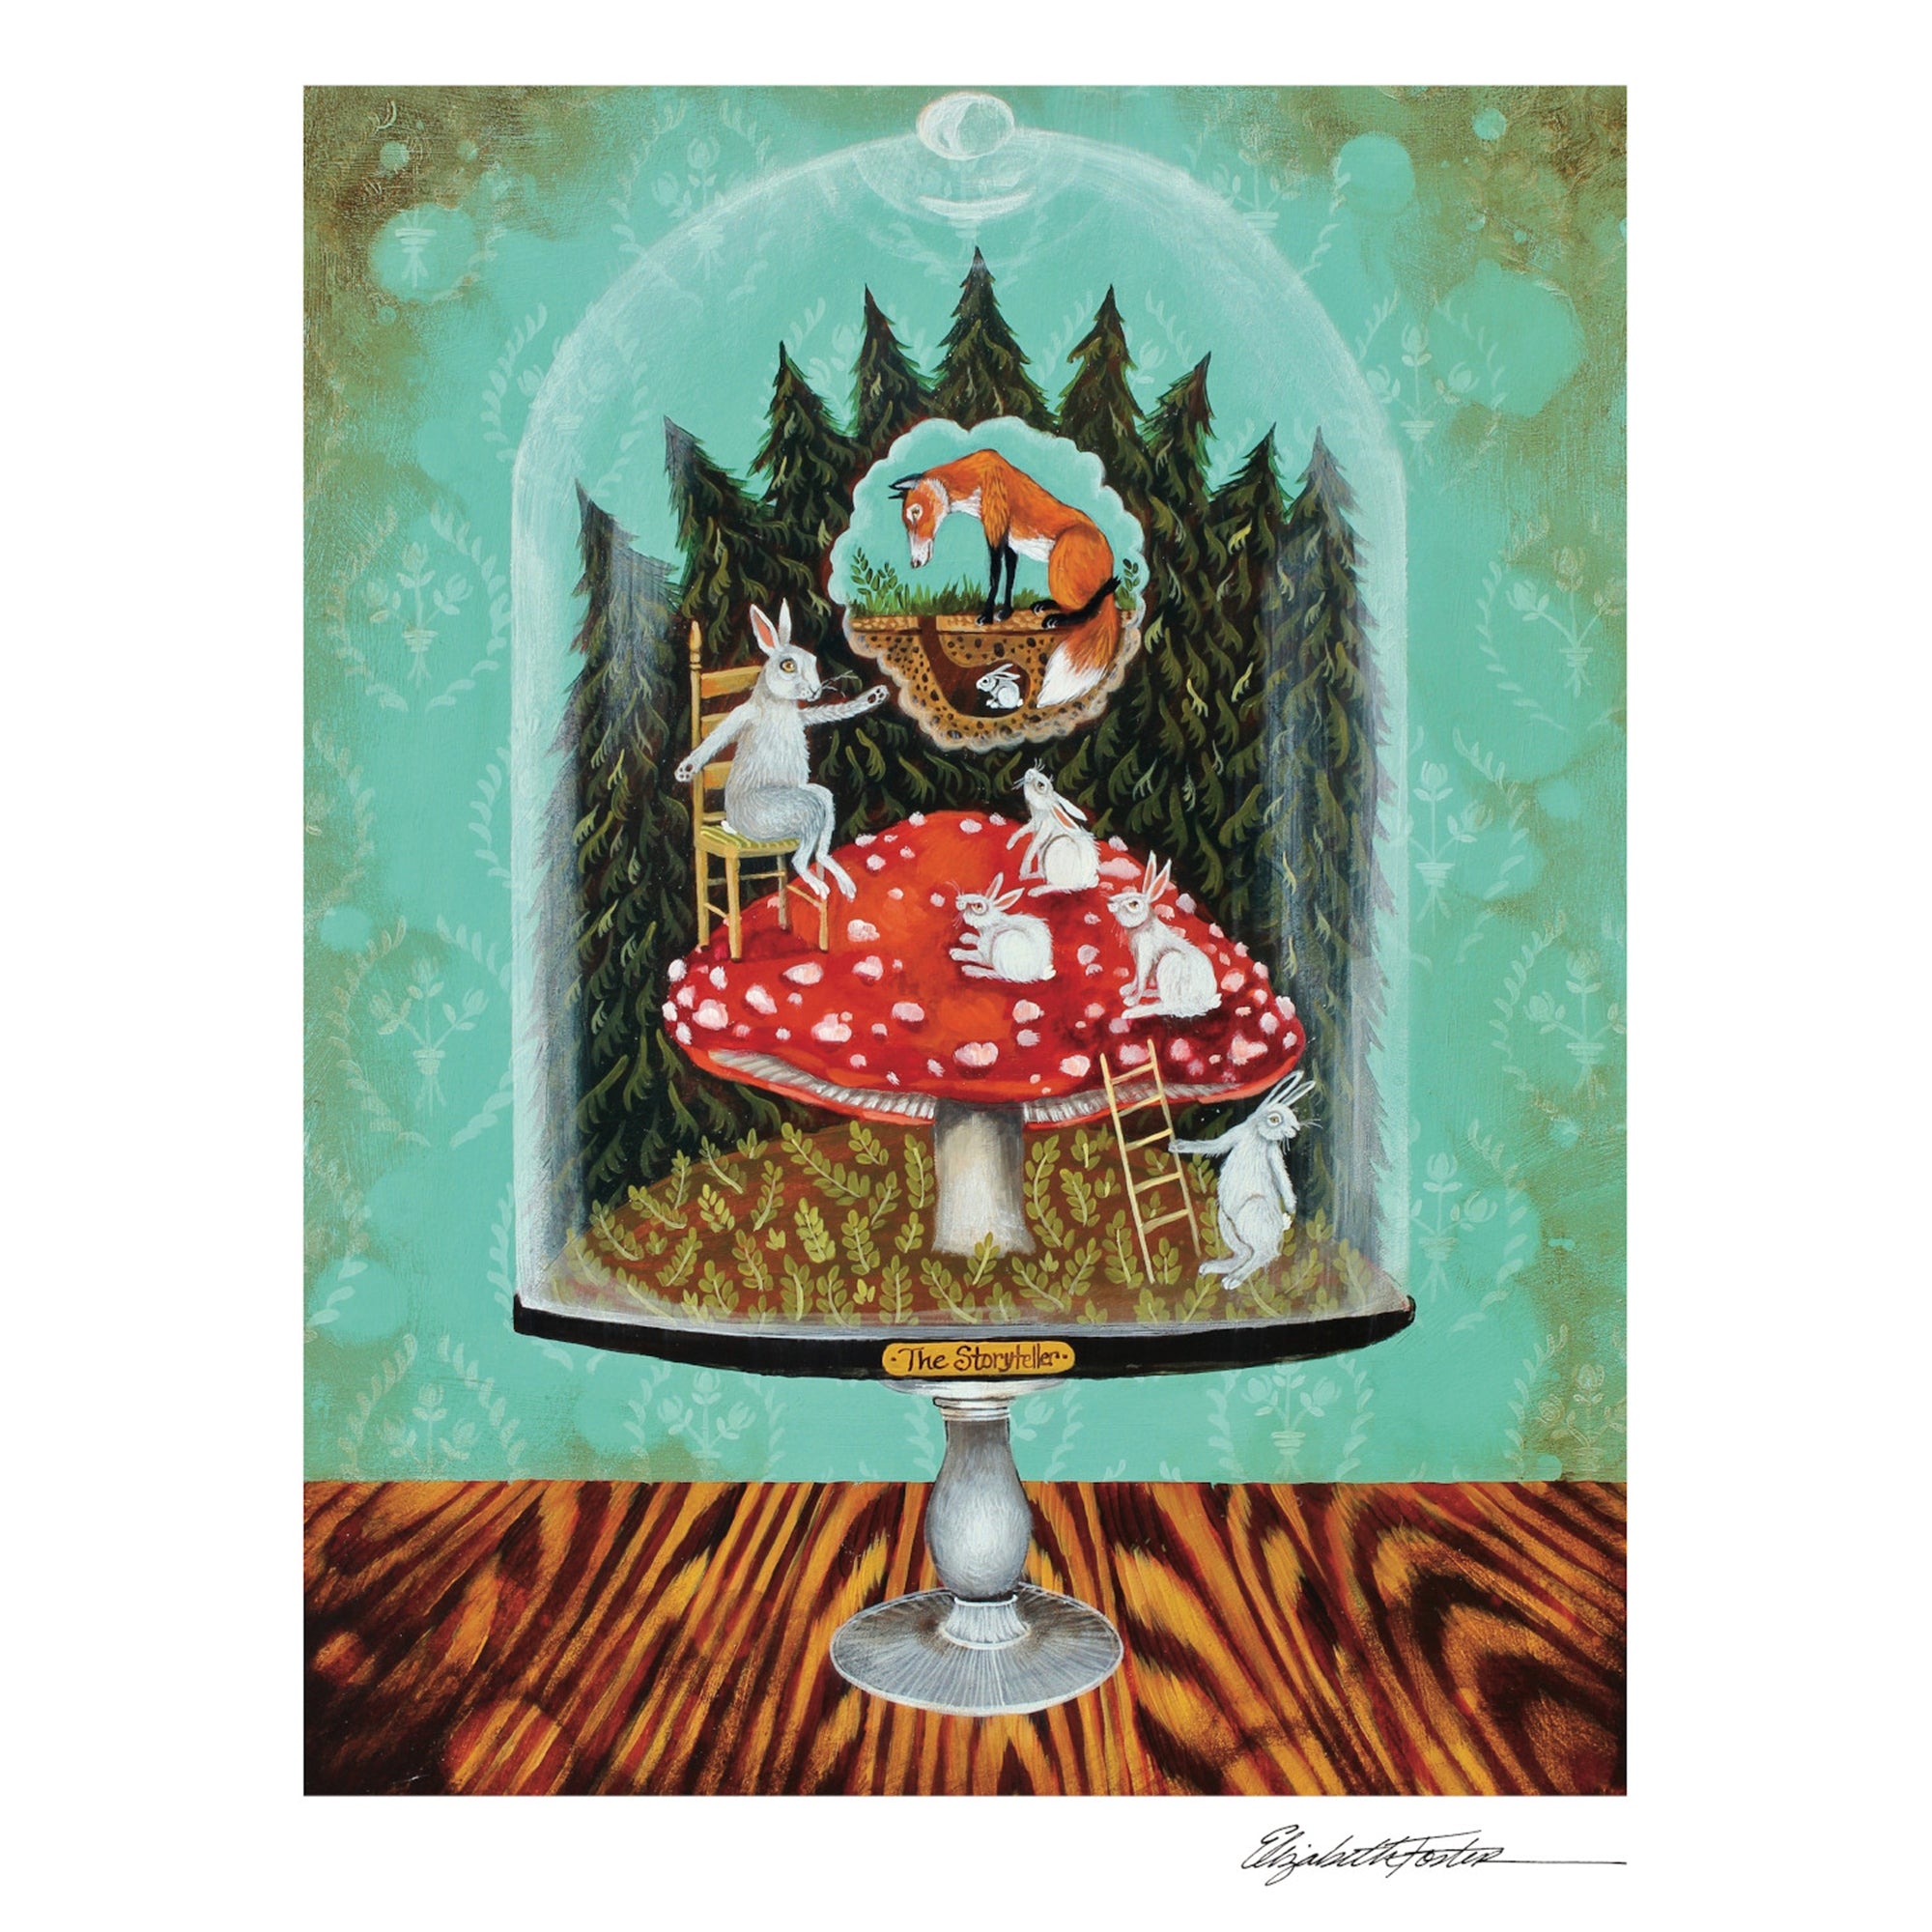 A fine quality The Storyteller Art Print of a mushroom under a glass dome by Hester &amp; Cook.